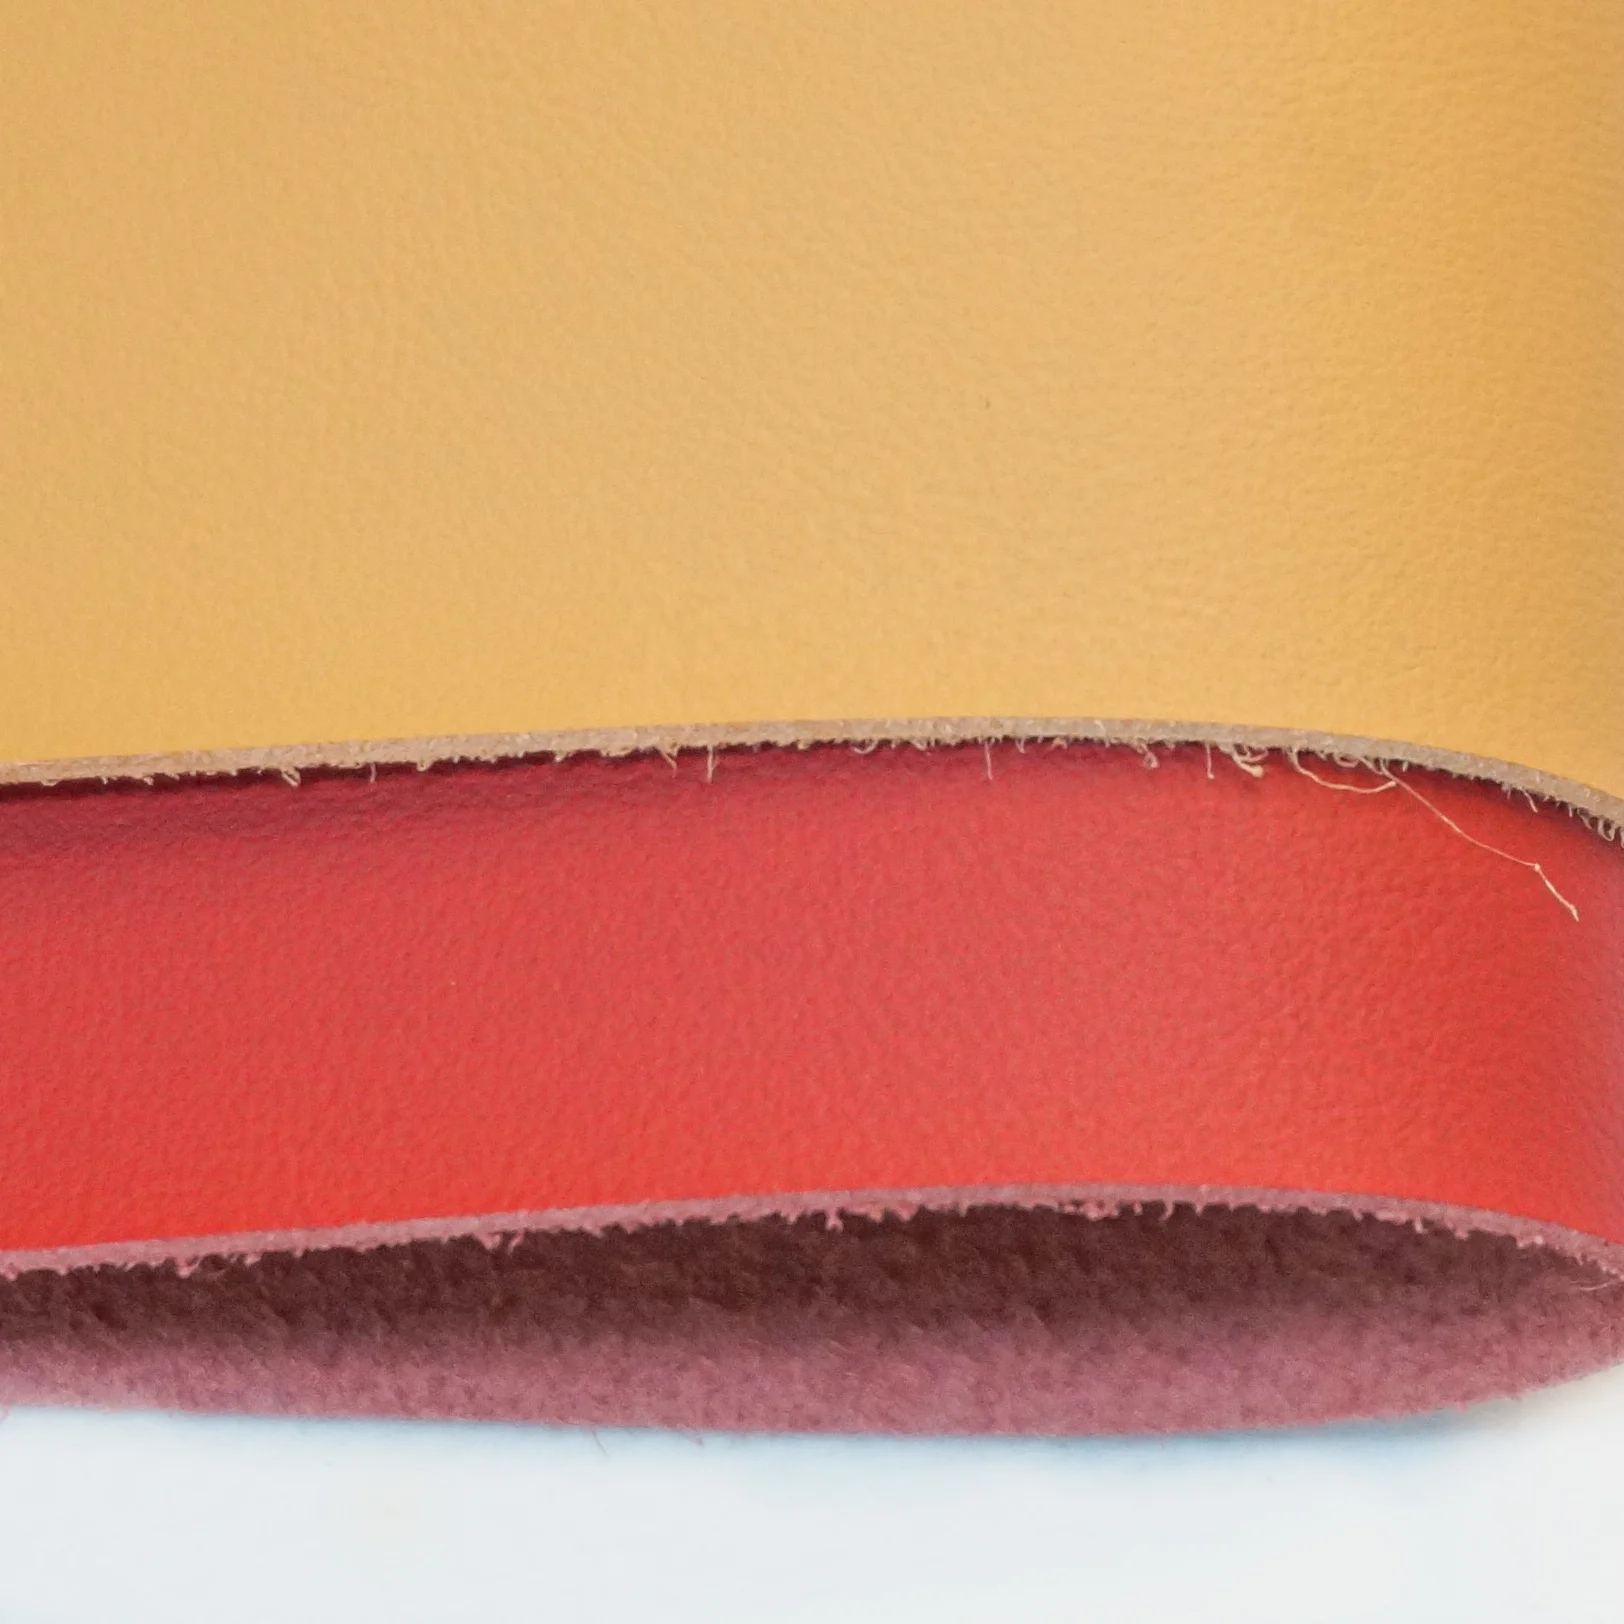 Top-Rated Amara Synthetic Suede Microfiber Leather: Stylish & Durable